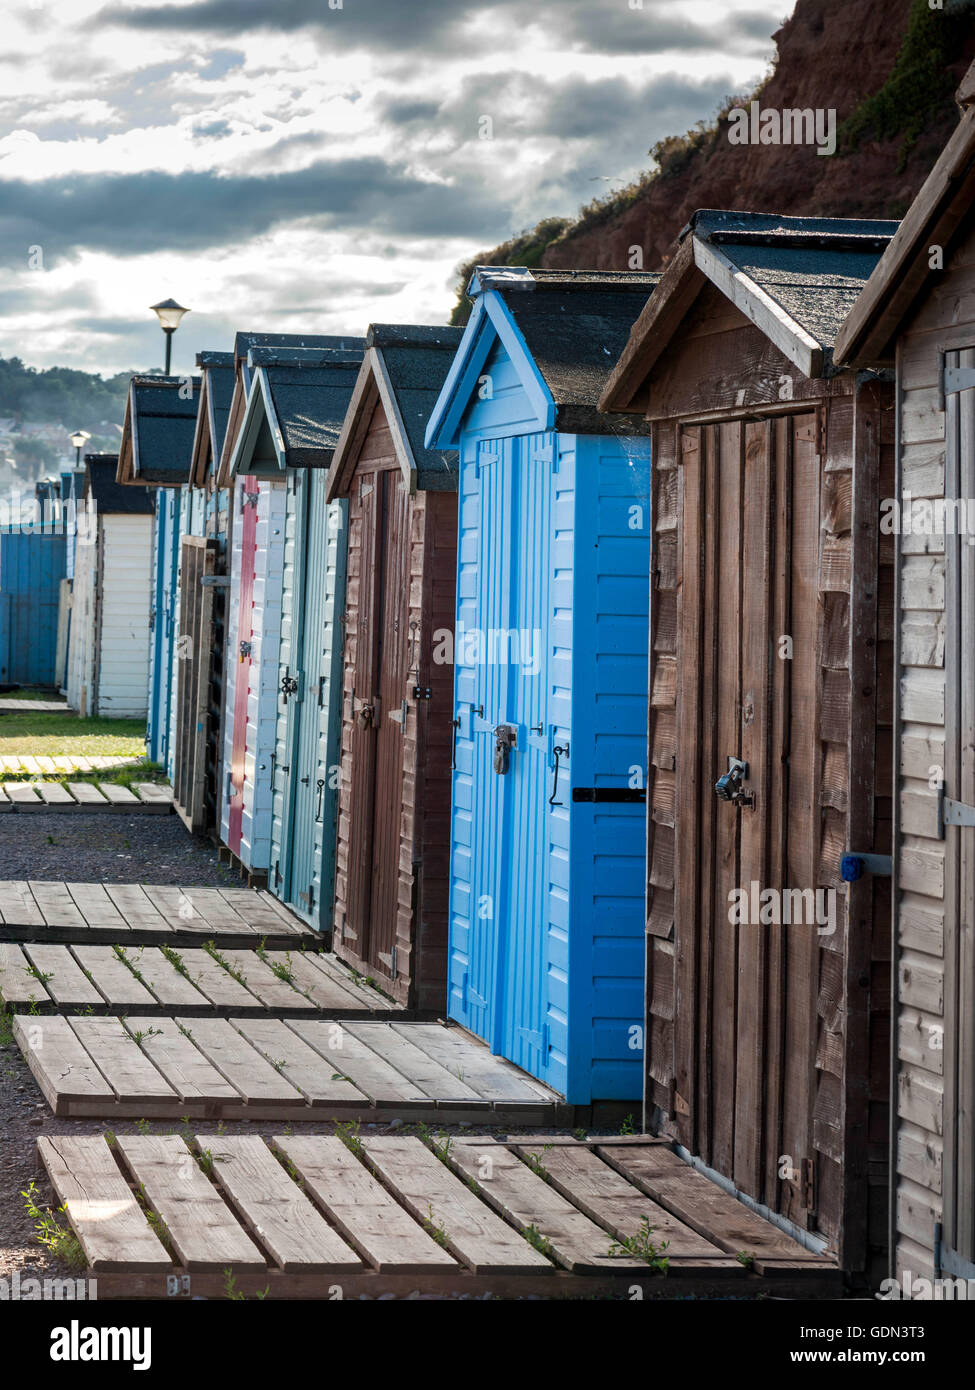 Seaside scene depicting a row of multicolored beach huts, wooden slatted pathway, pebbled beach and Jurassic coast. Stock Photo